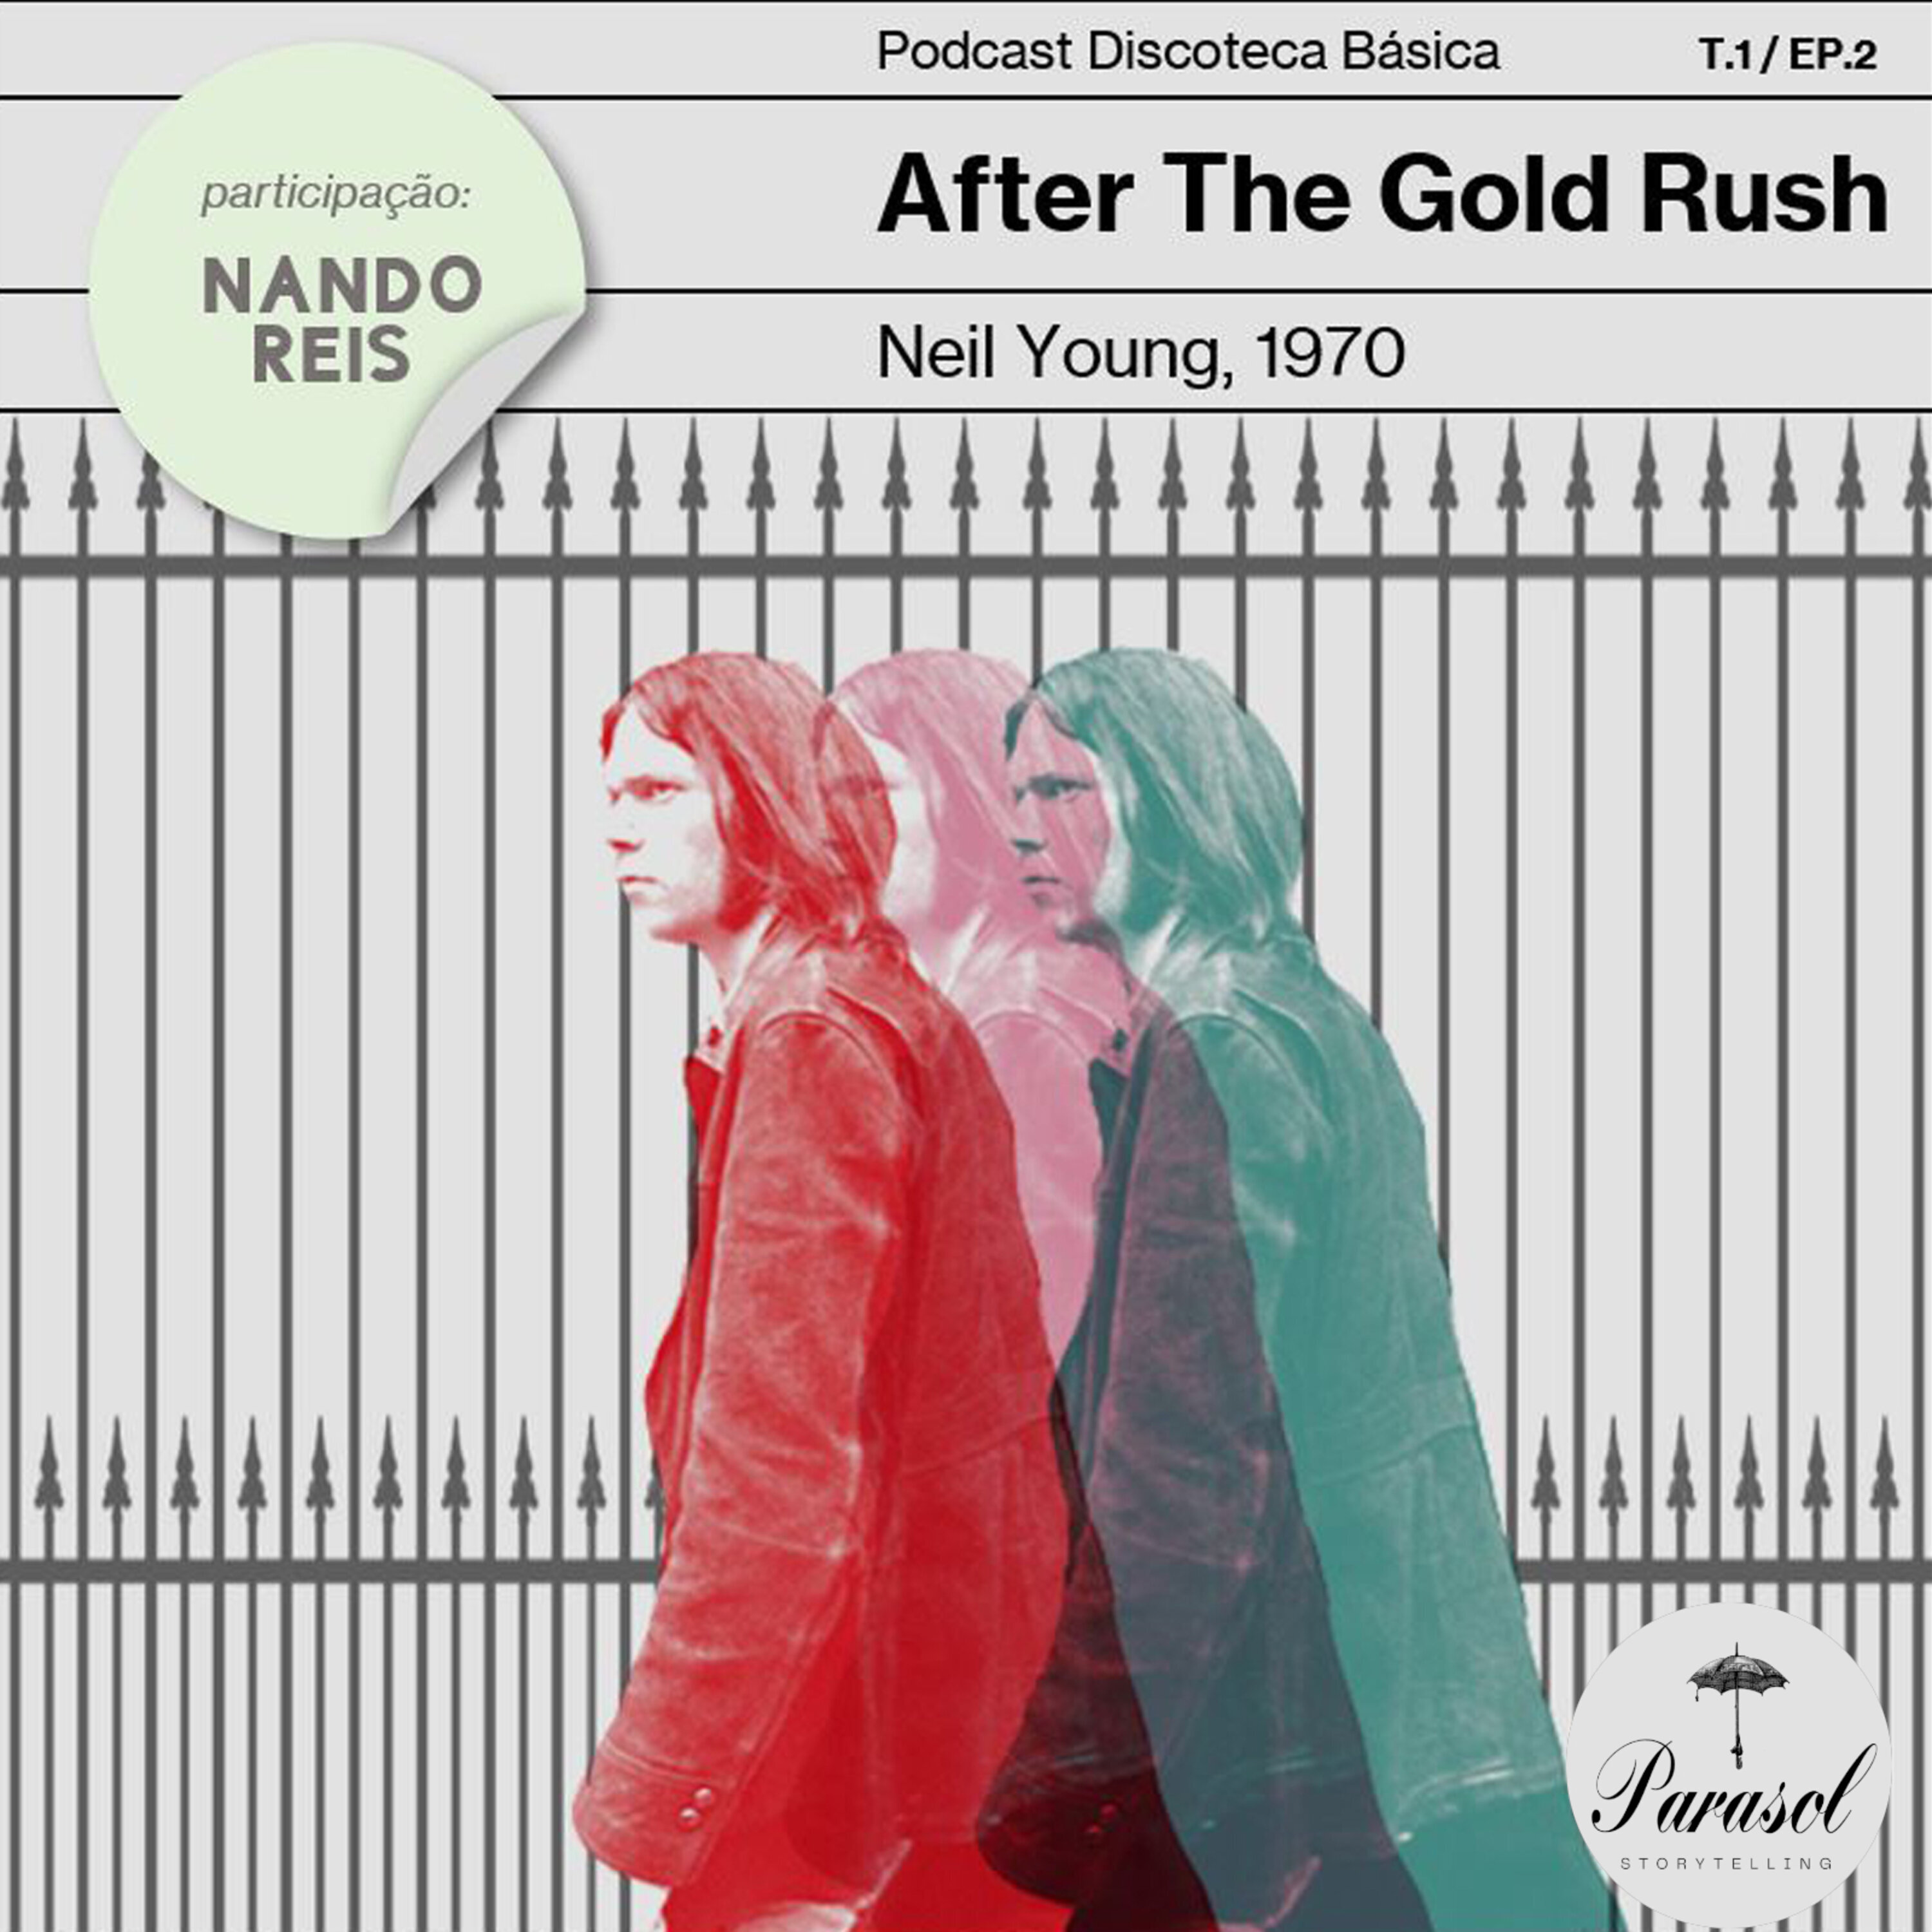 T01E02: After The Gold Rush - Neil Young (1970)